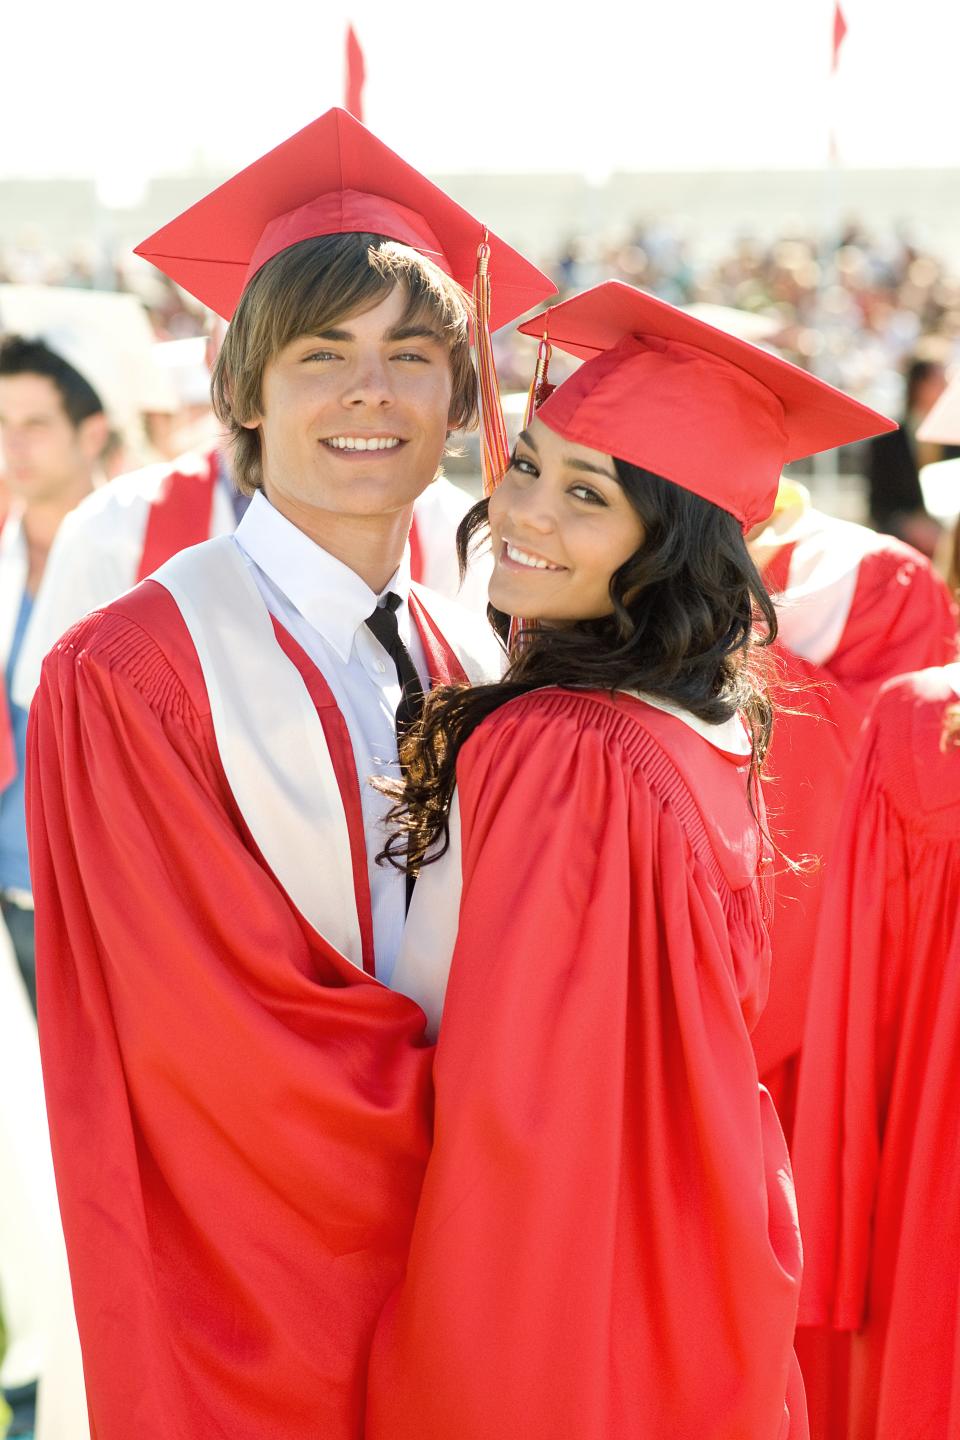 Zac Efron and Vanessa Hudgens are smiling and wearing graduation caps and gowns at a graduation event